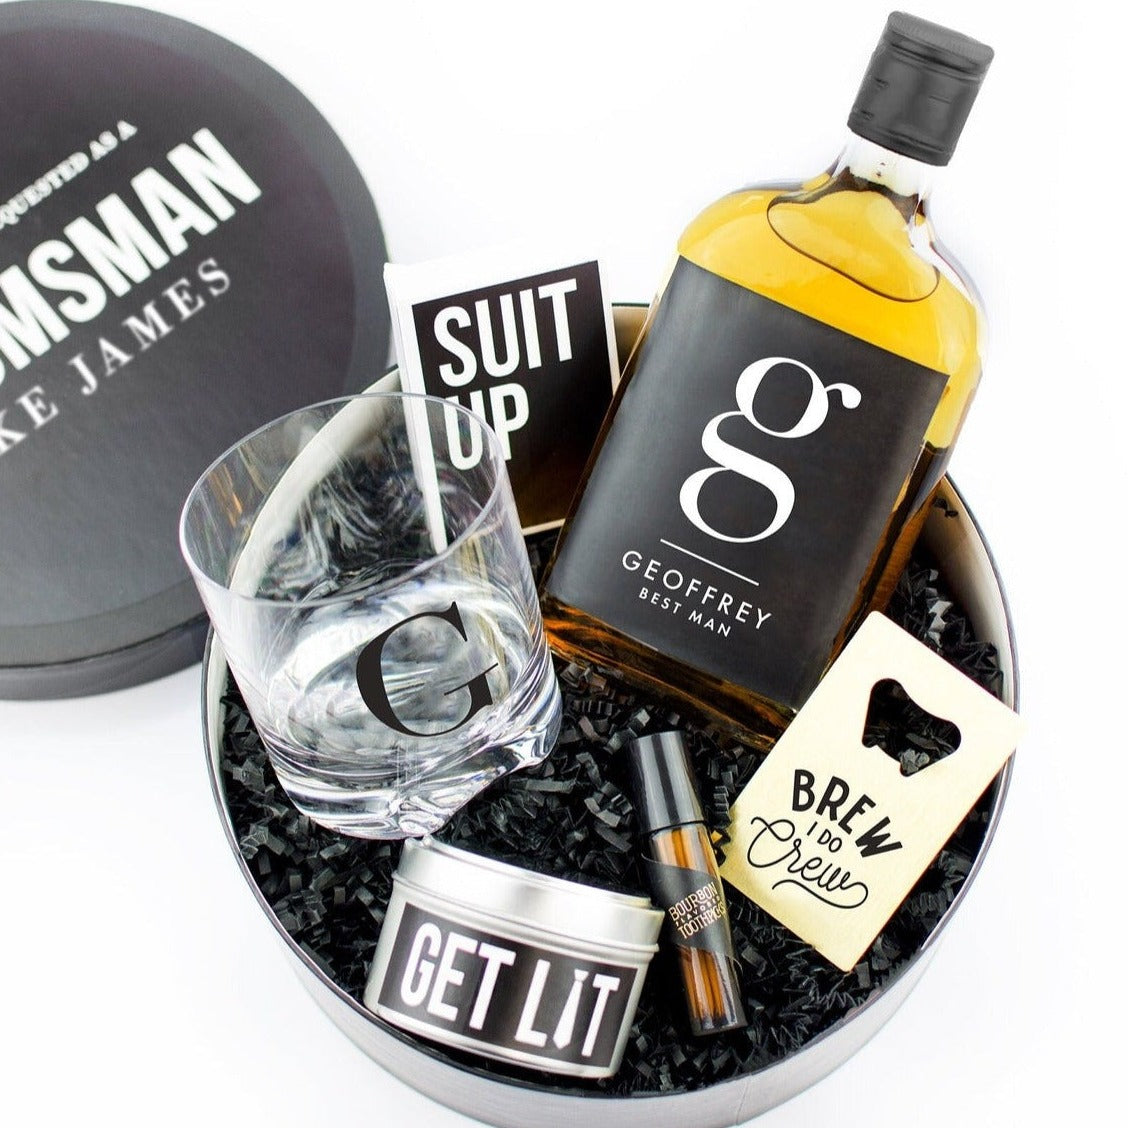 Whiskey Crate Gift Set - Groovy Groomsmen Gifts